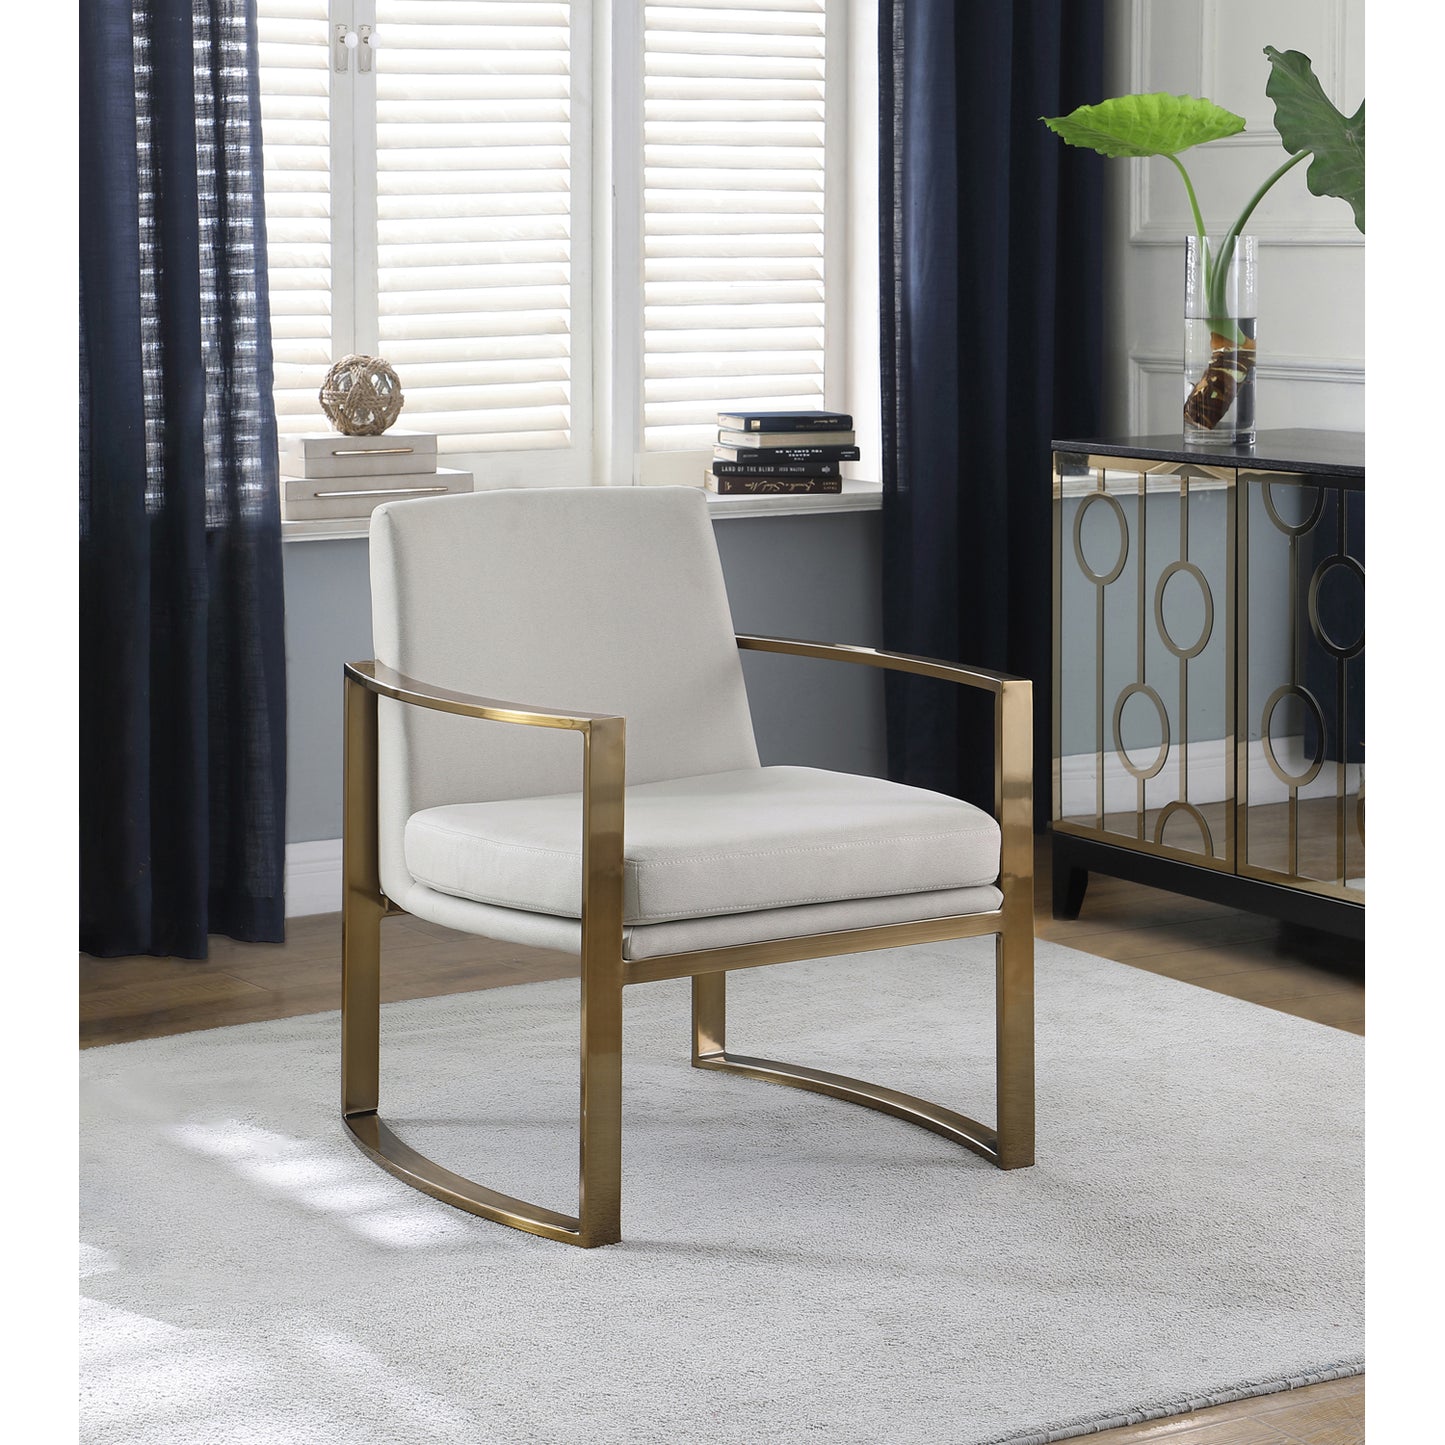 Concave Metal Arm Accent Chair Cream and Bronze